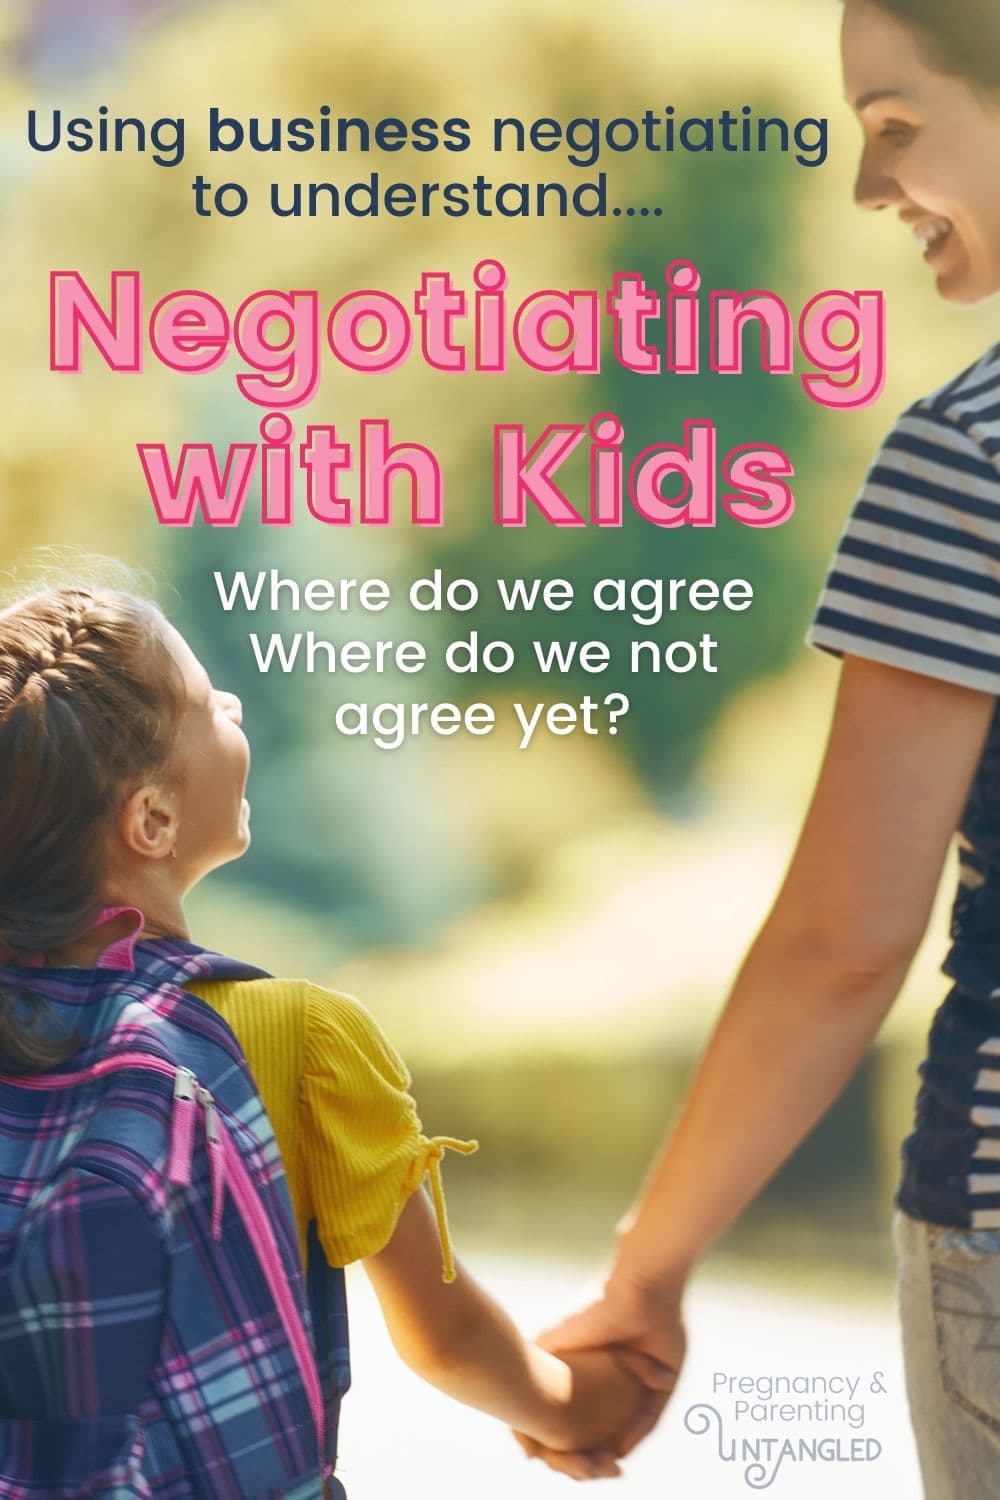 Figuring out how to negotiate with kids is something I think we can take our business experience to help us work with our kids to find the best solution. via @pullingcurls